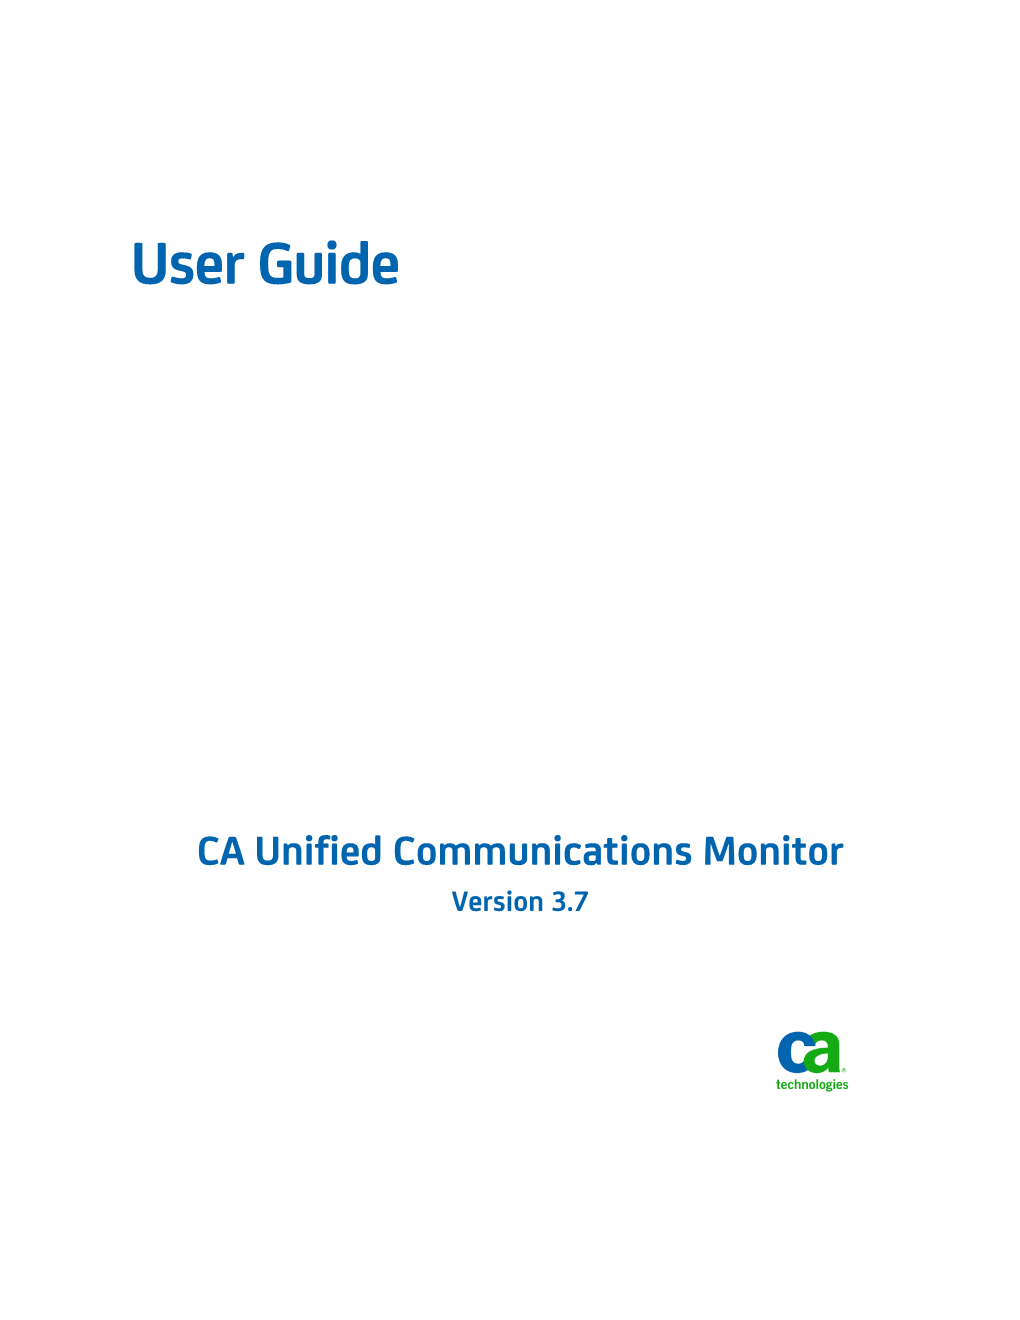 User Guide CA Unified Communications Monitor